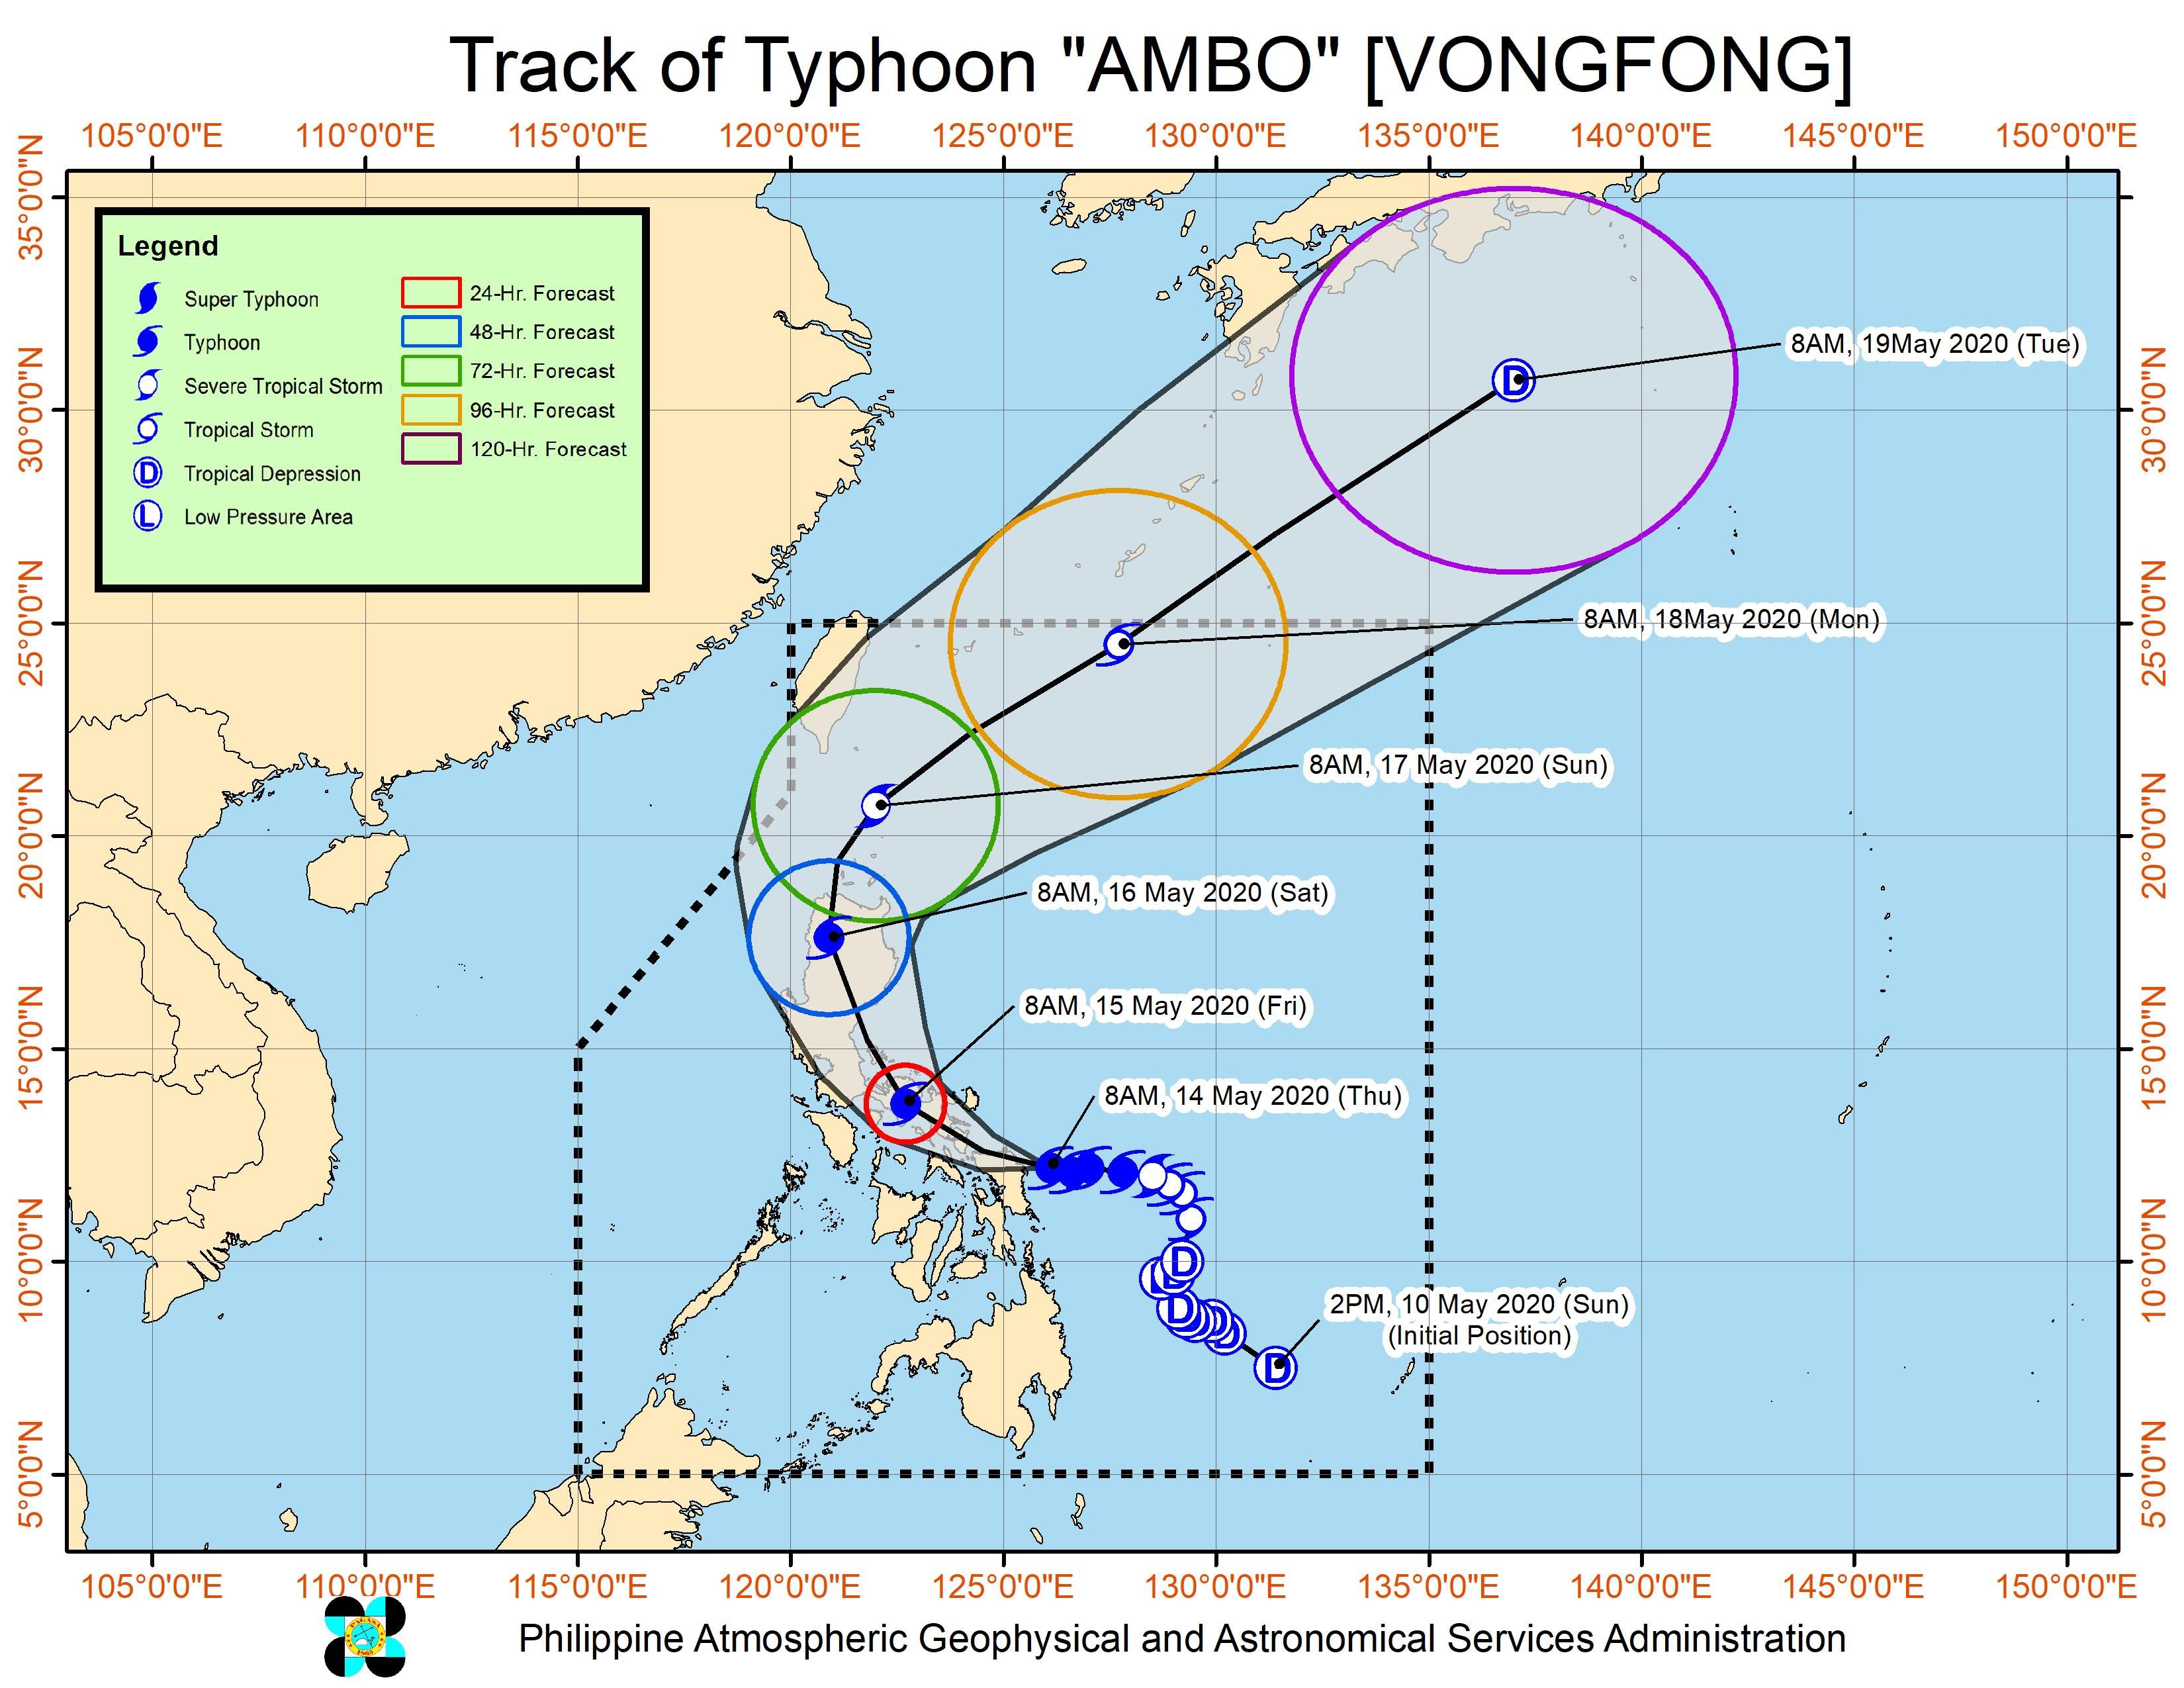 Forecast track of Typhoon Ambo (Vongfong) as of May 14, 2020, 11 am. Image from PAGASA 